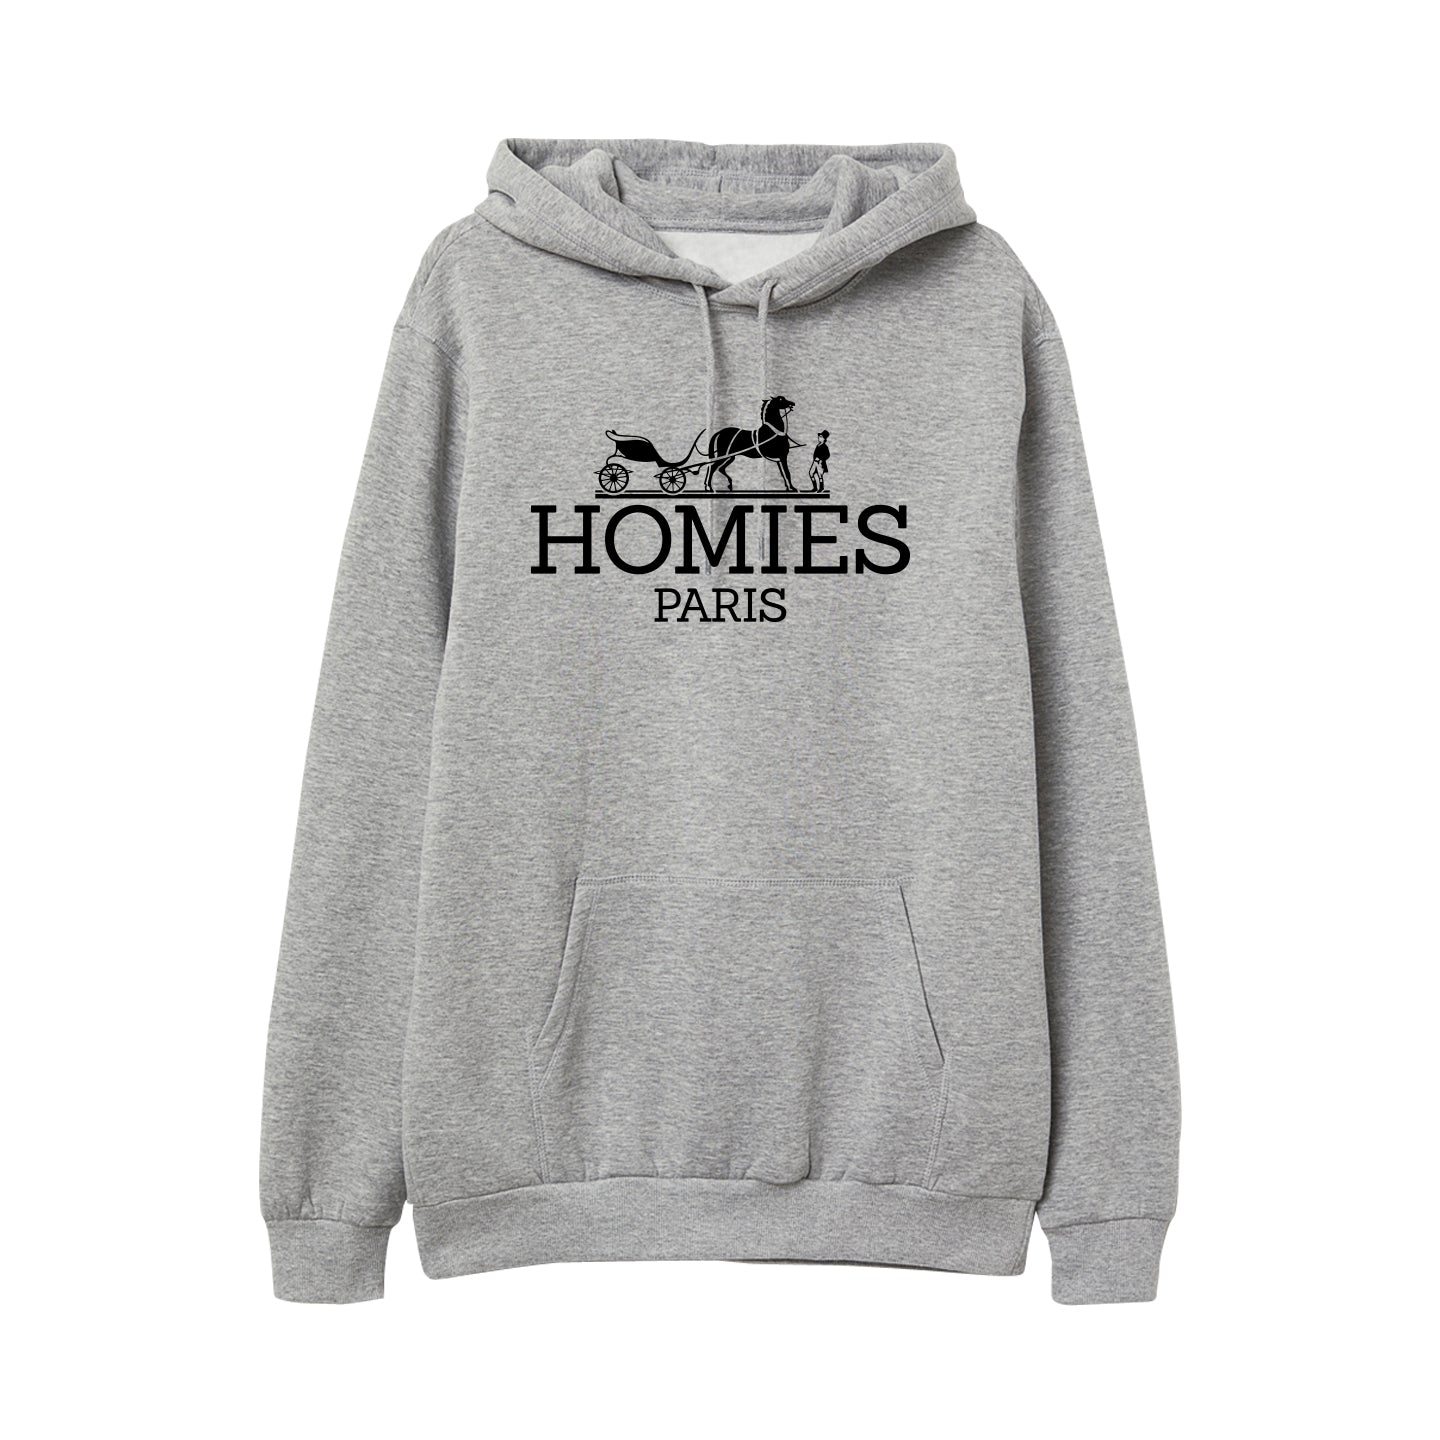 Homies Hoodie (Limited Edition) TDL – The Dirt Label